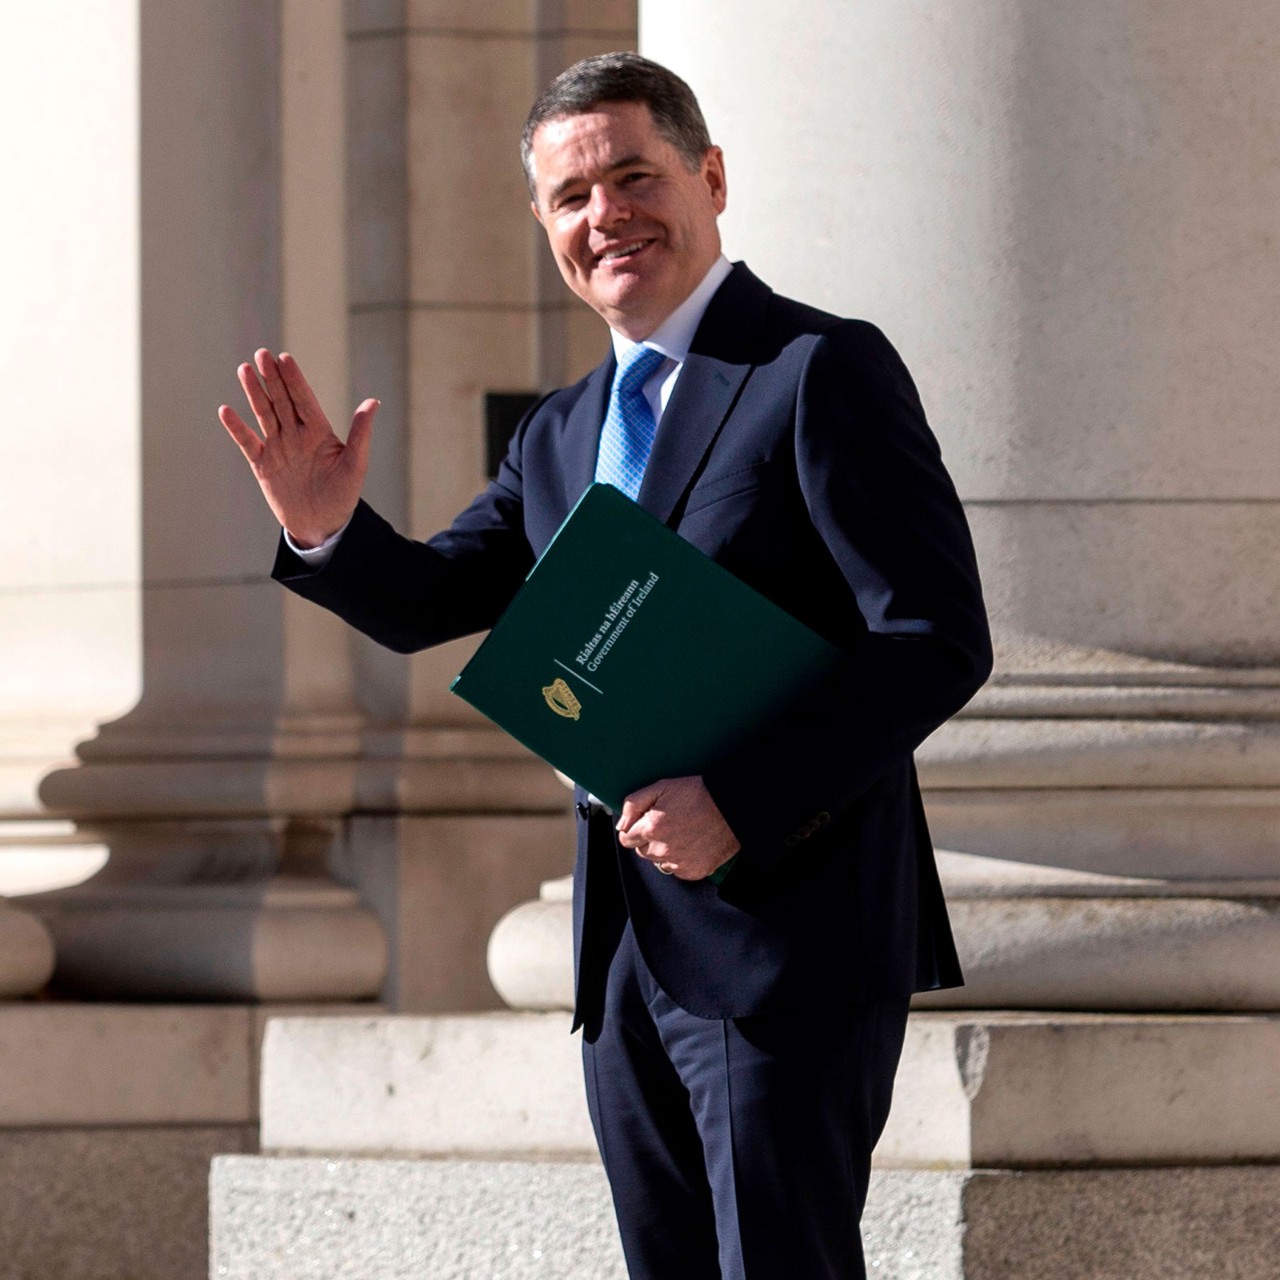 The 2022 Irish Budget will be a difficult balancing act for Ireland's finance minister, Paschal Donohoe